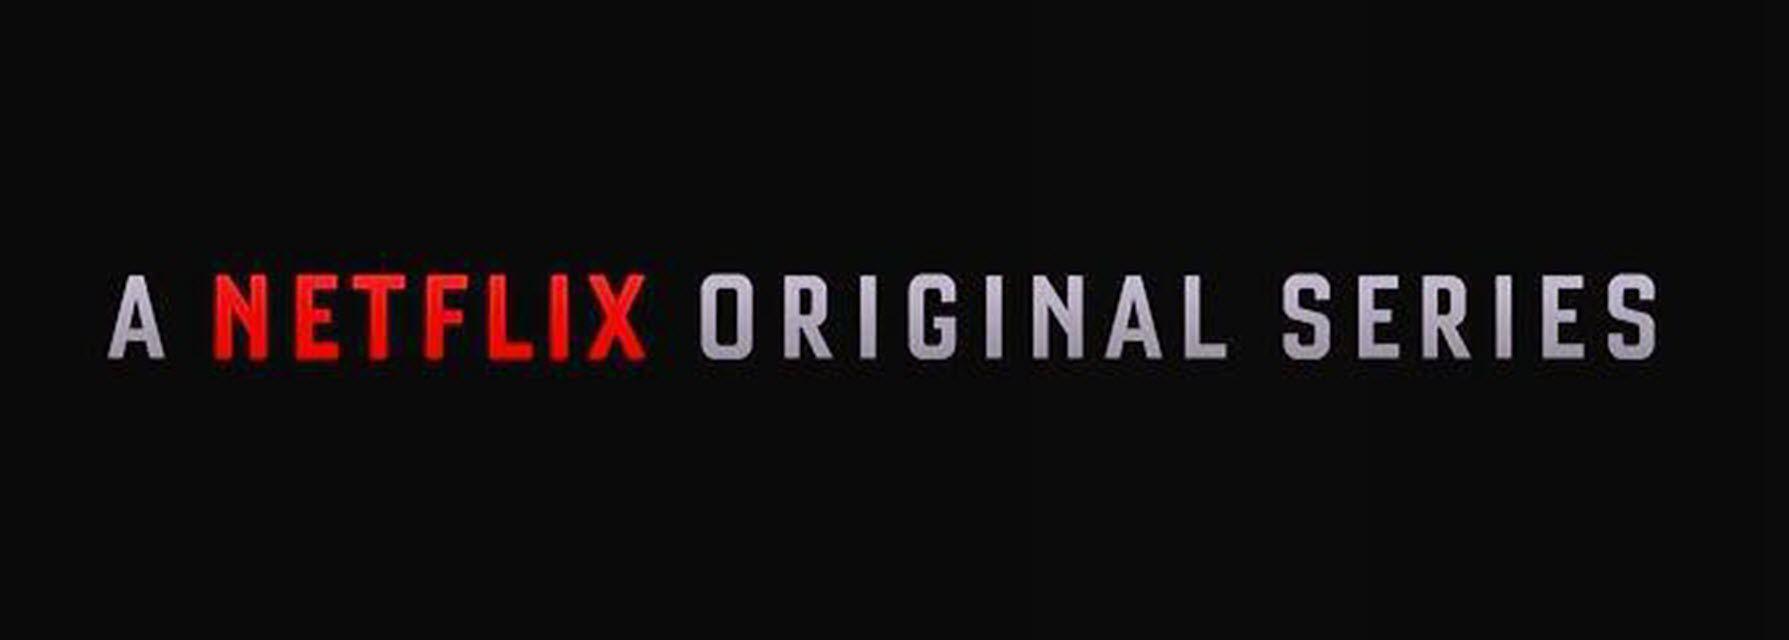 Netflix Streaming Logo - What Types of Shows Stream on Netflix?